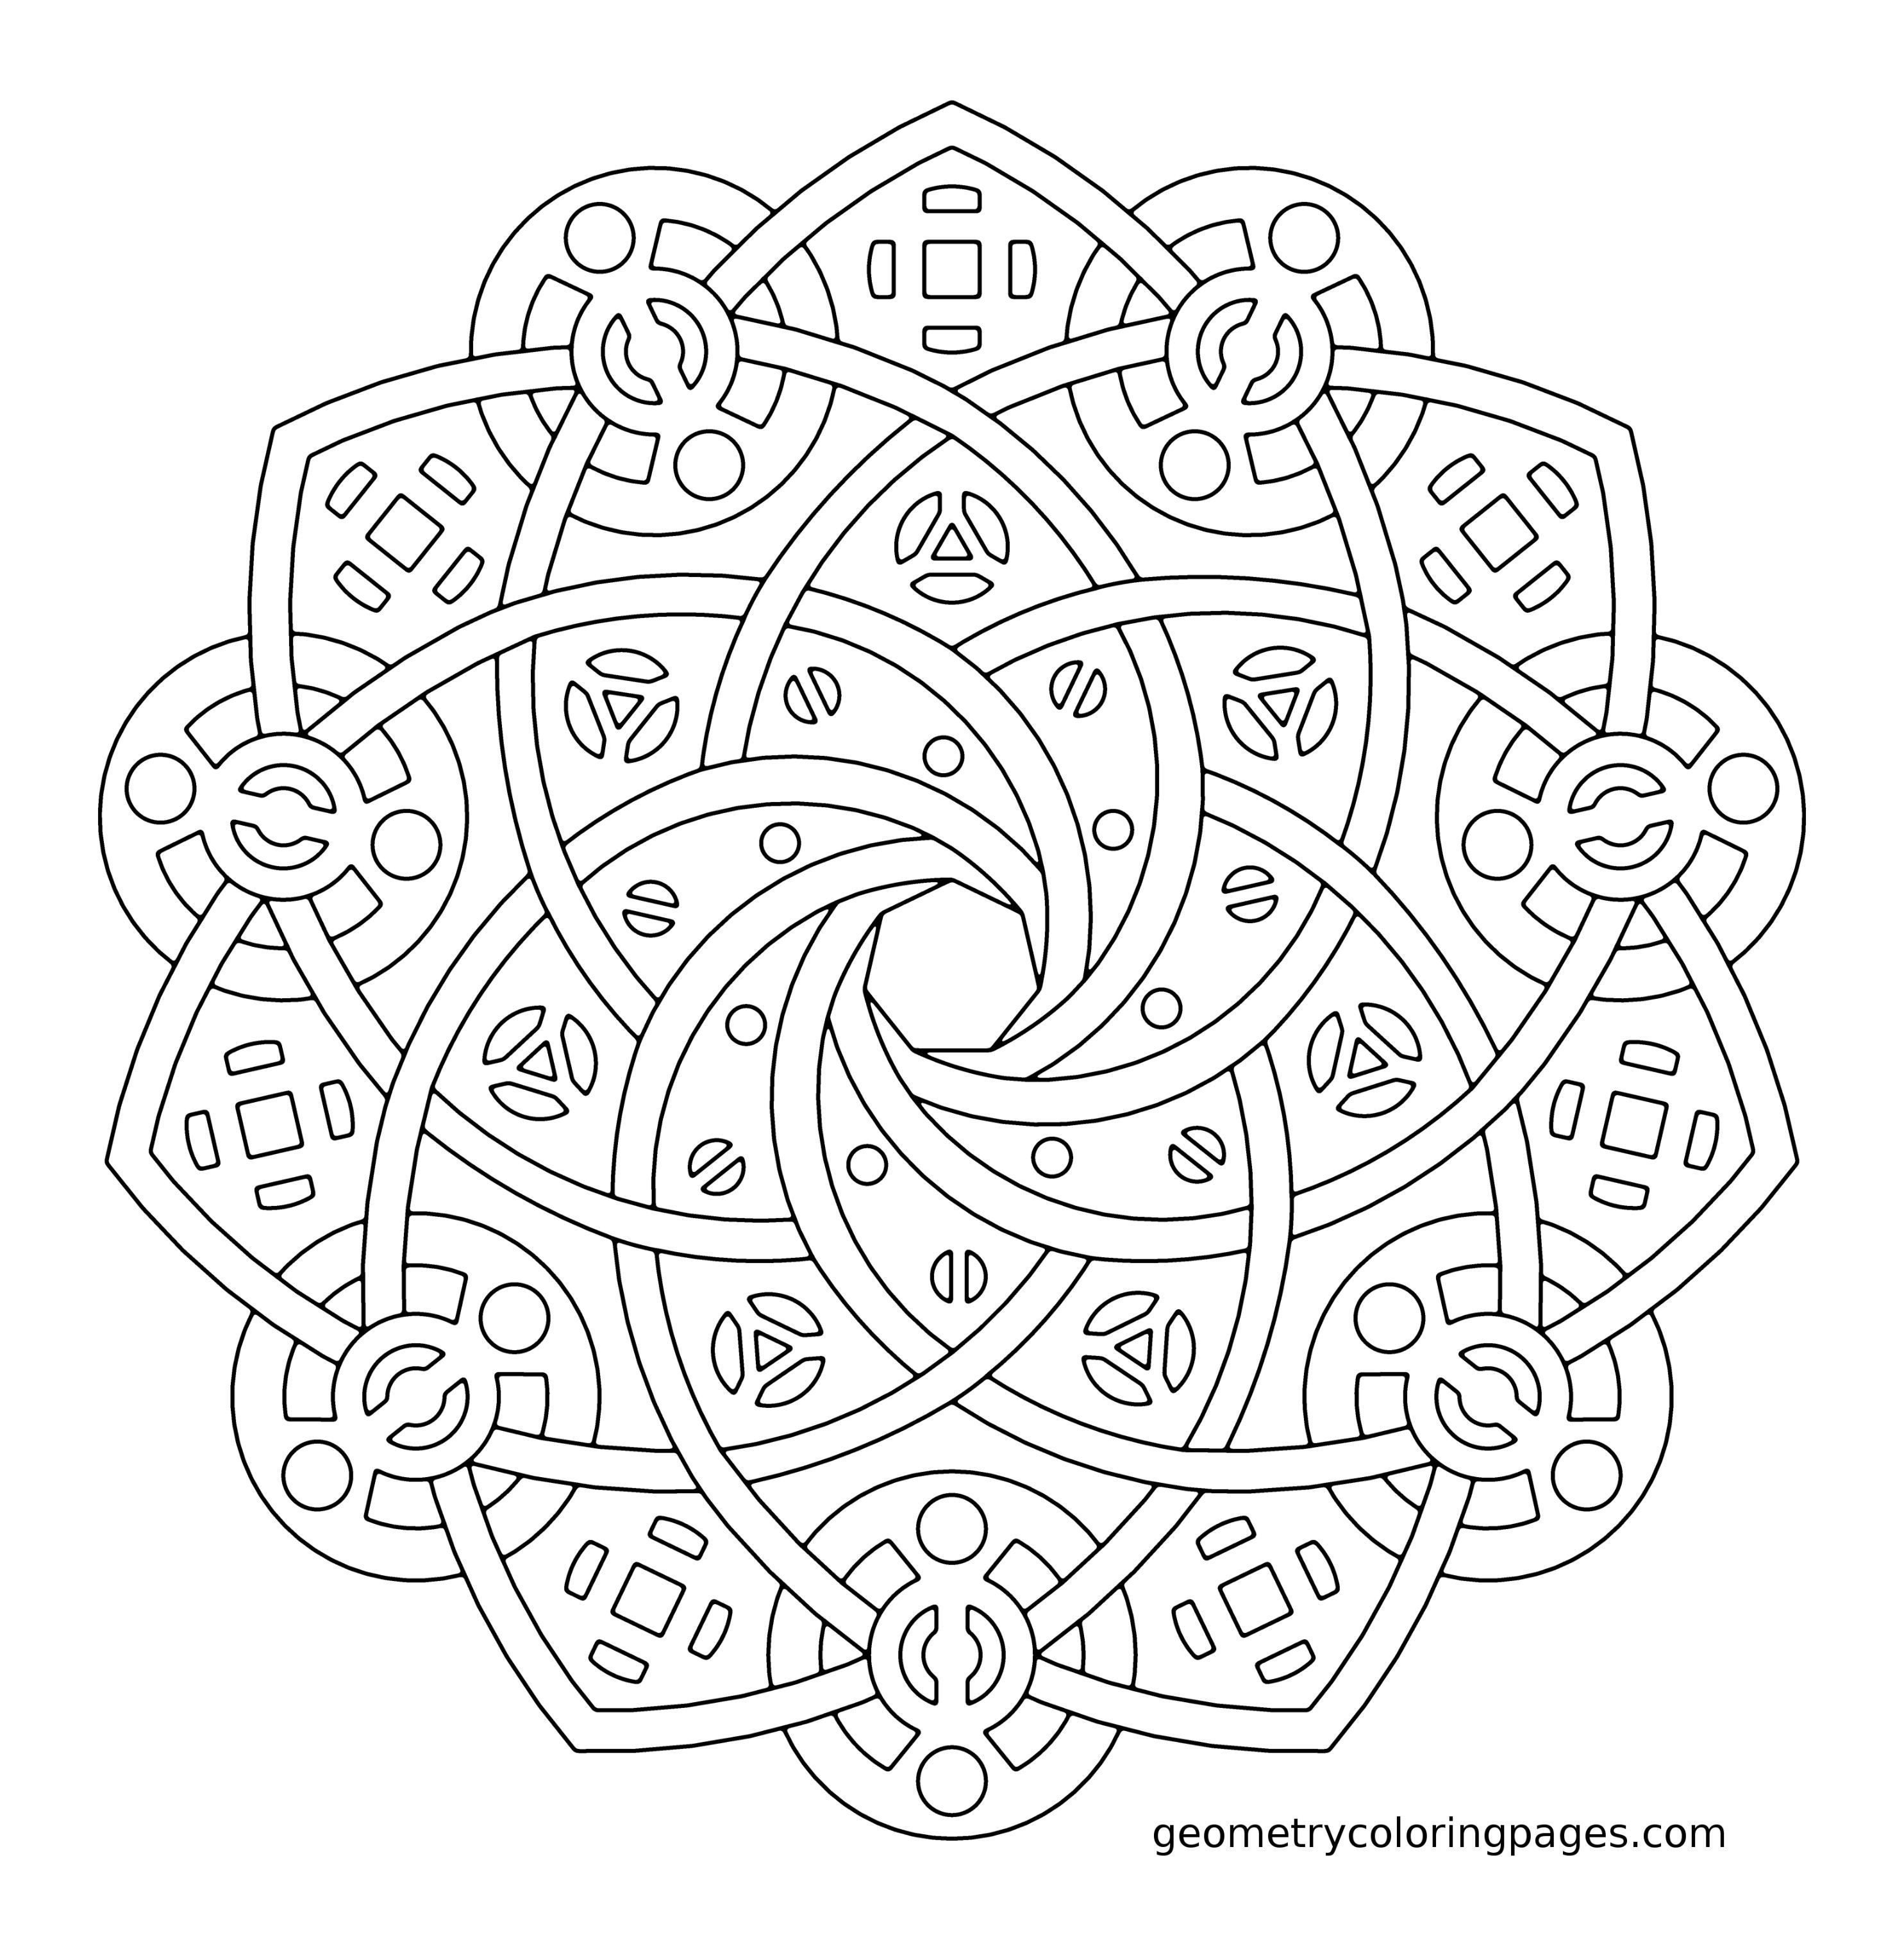 Geometric Coloring Pages
 Geometric Coloring Pages For Adults Coloring Home